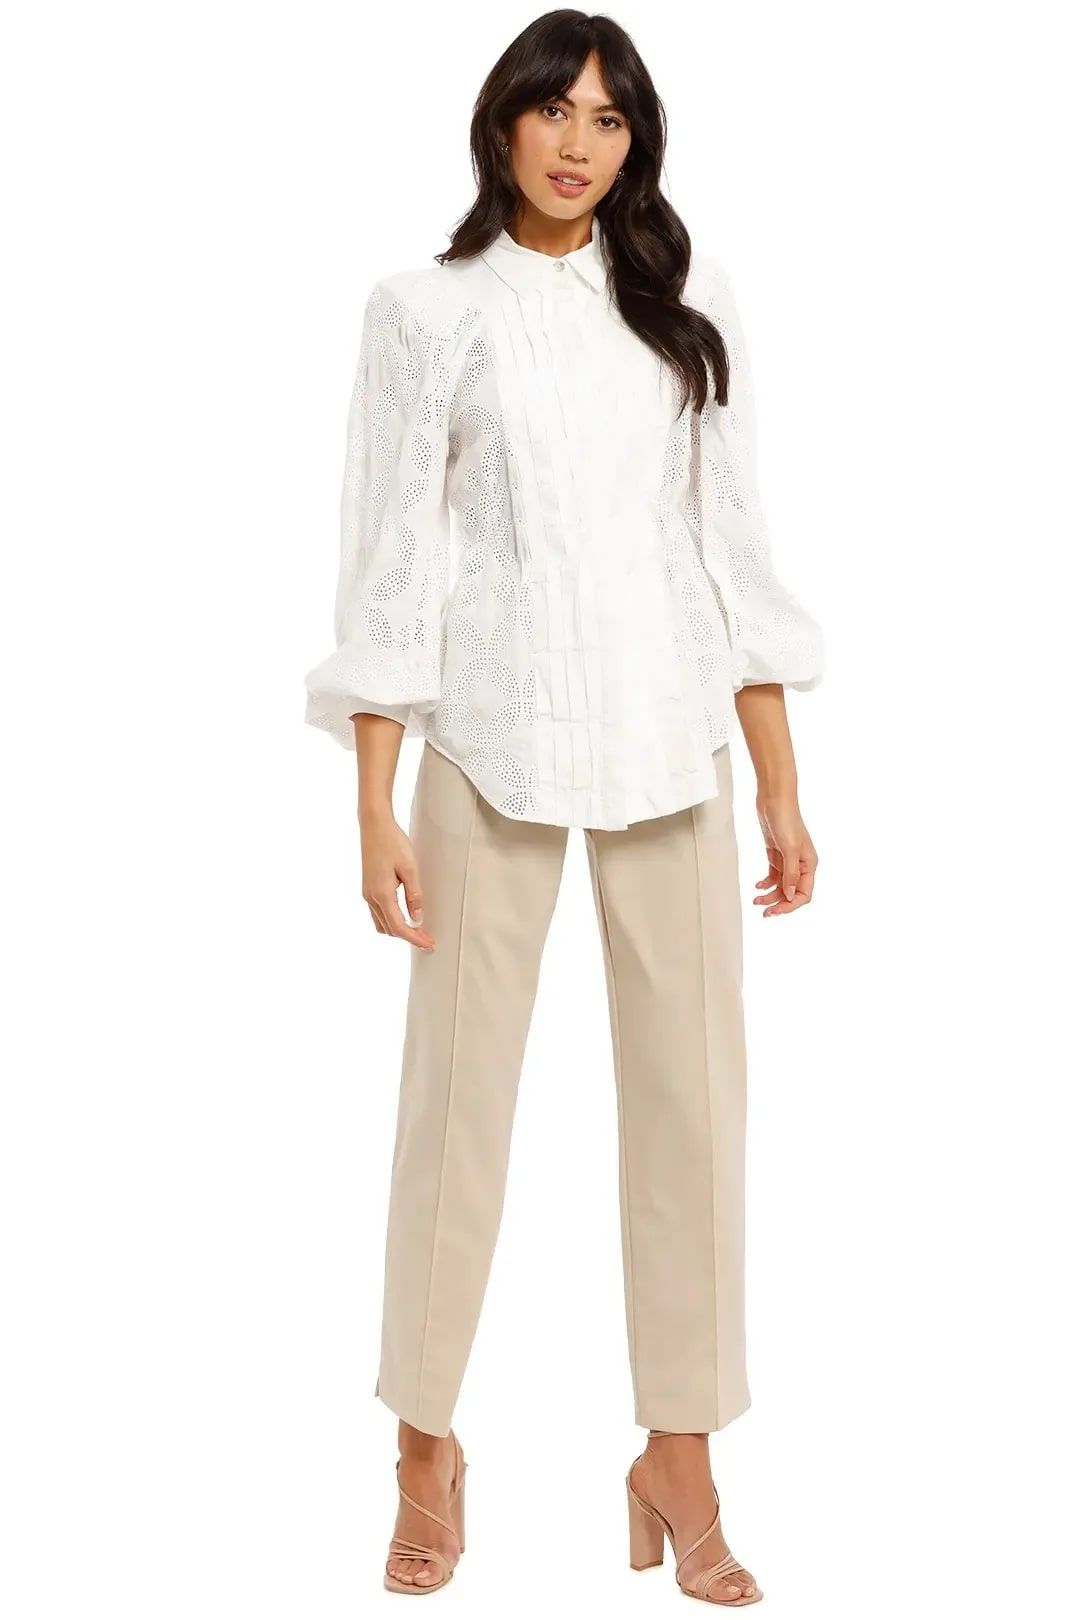 Hire Klara shirt in ivory for casual wear.